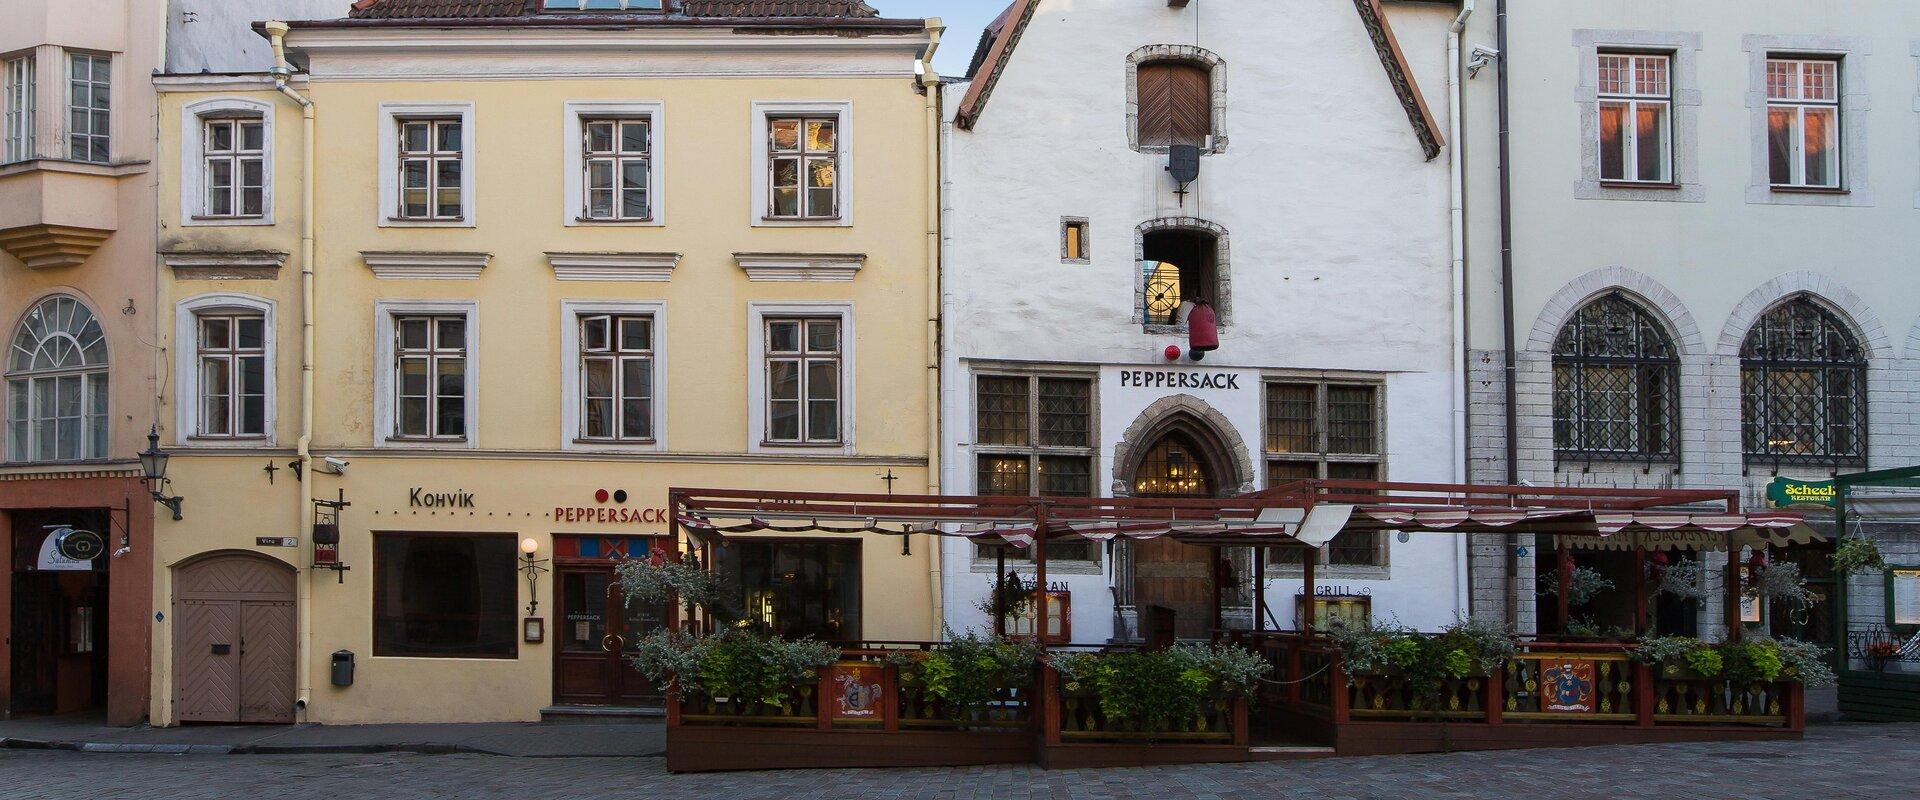 Restaurant Peppersack is located at the heart of Tallinn's Old Town in a building with an interesting history. Peppersack or 'a sack of pepper' has en